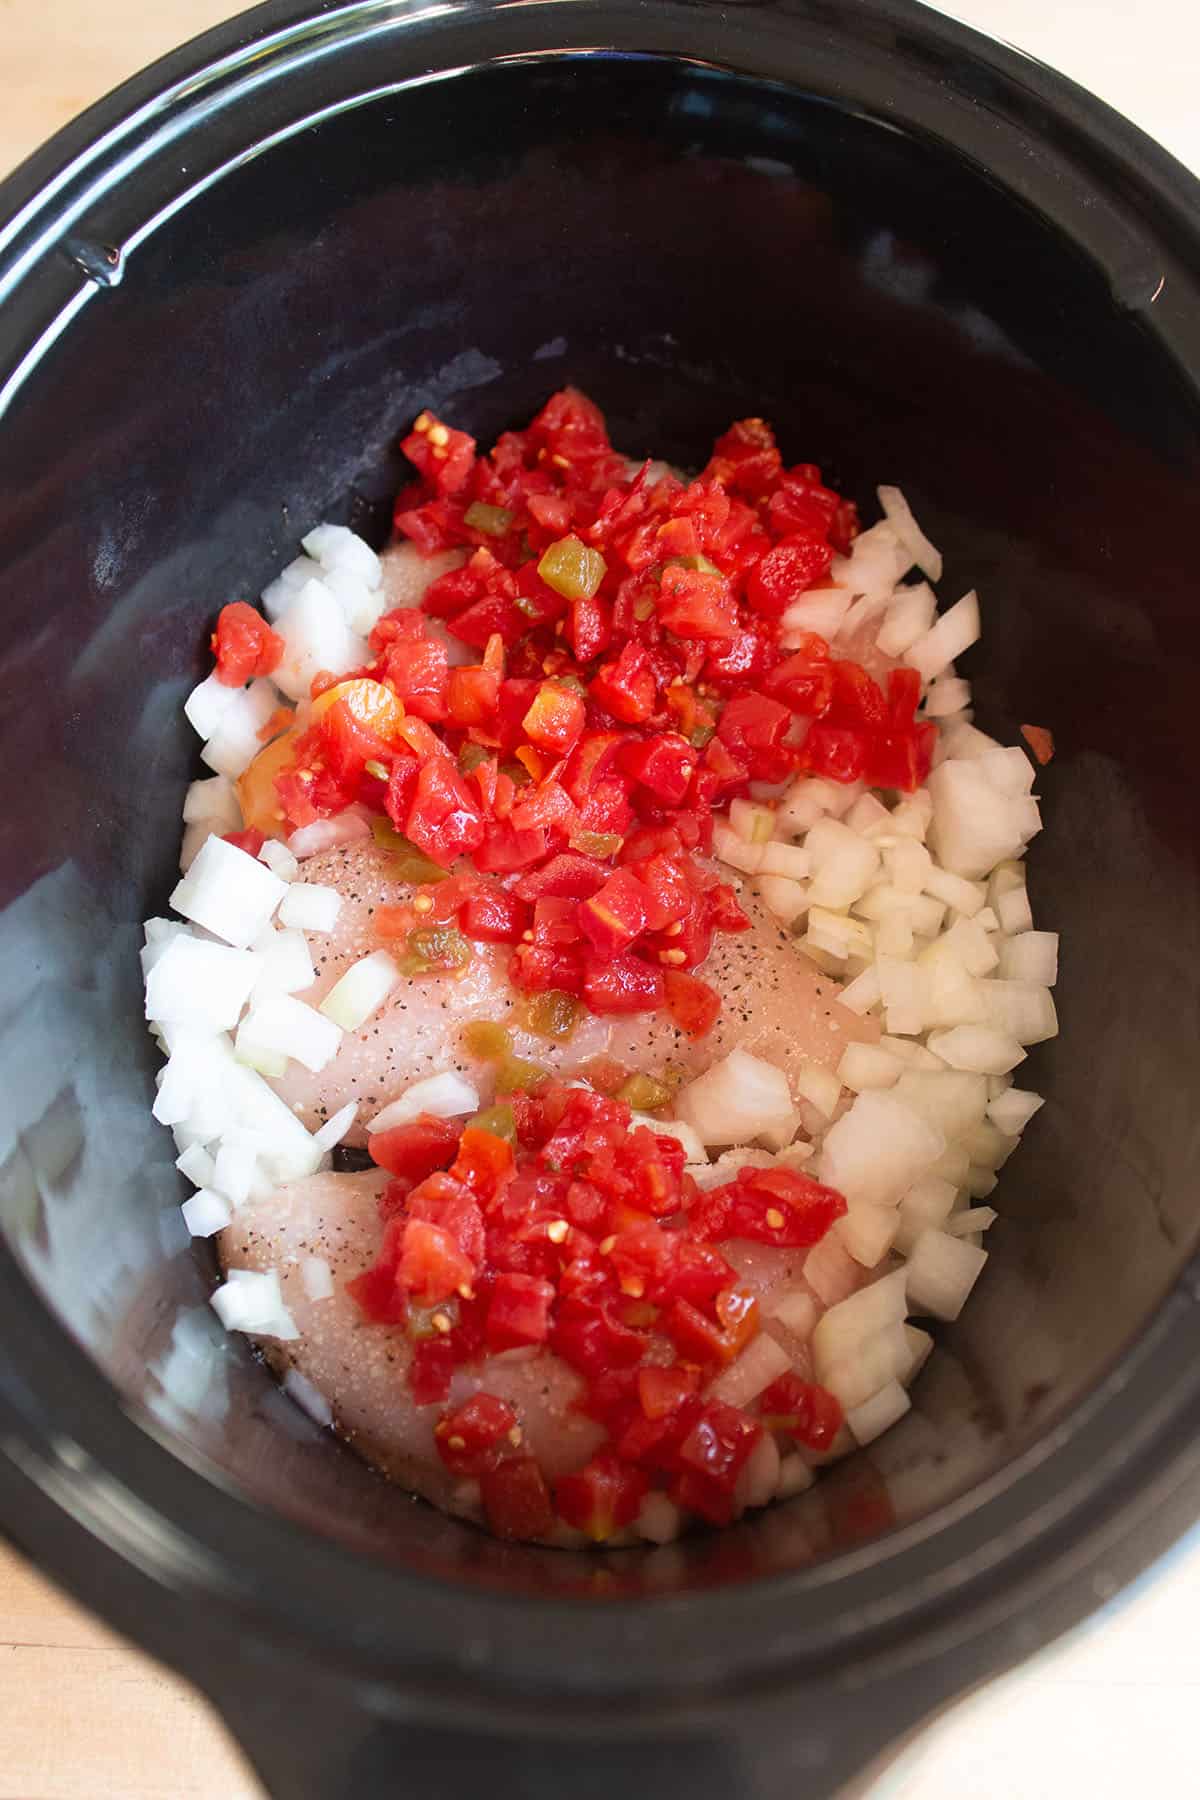 A slow cooker with raw chicken, onions and diced tomatoes.